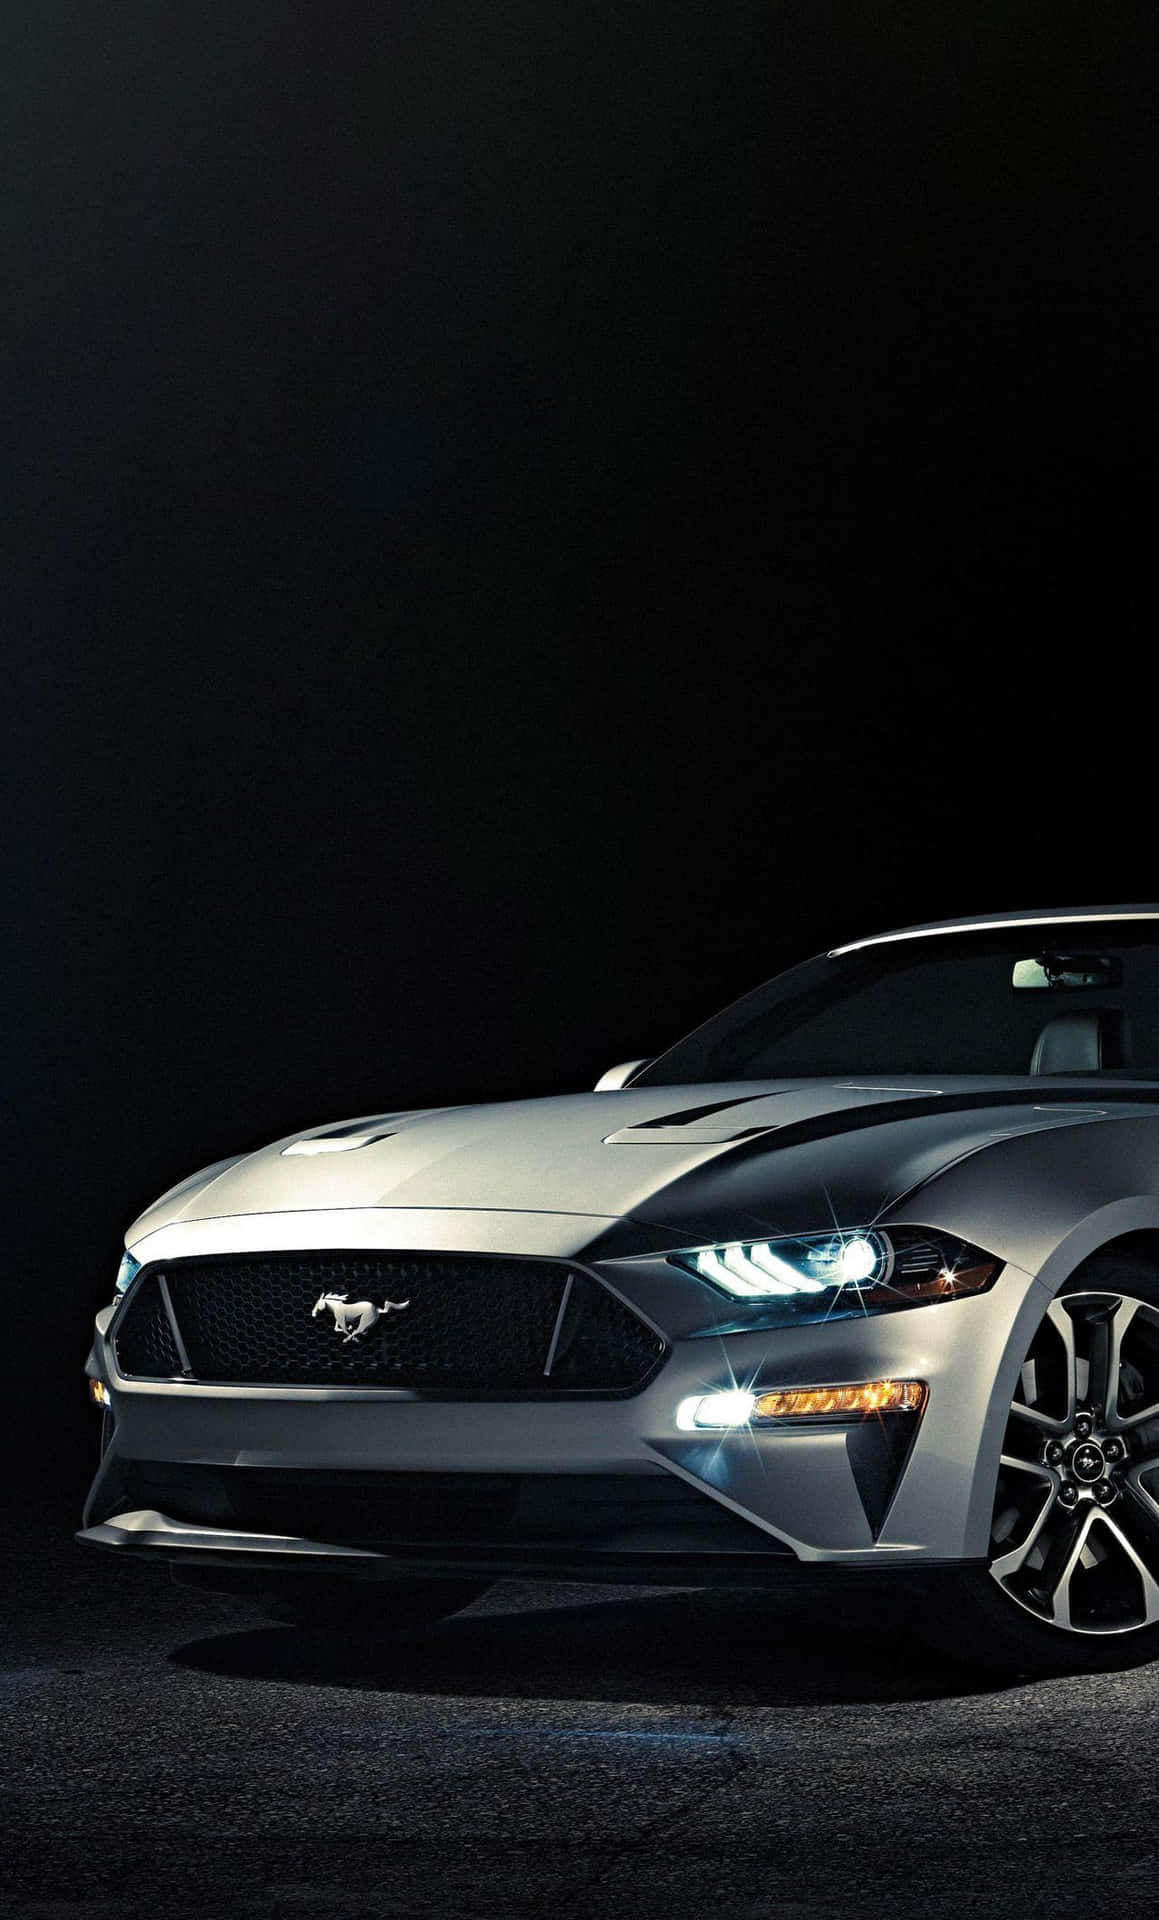 The 2019 Ford Mustang Is Shown In A Dark Room Wallpaper